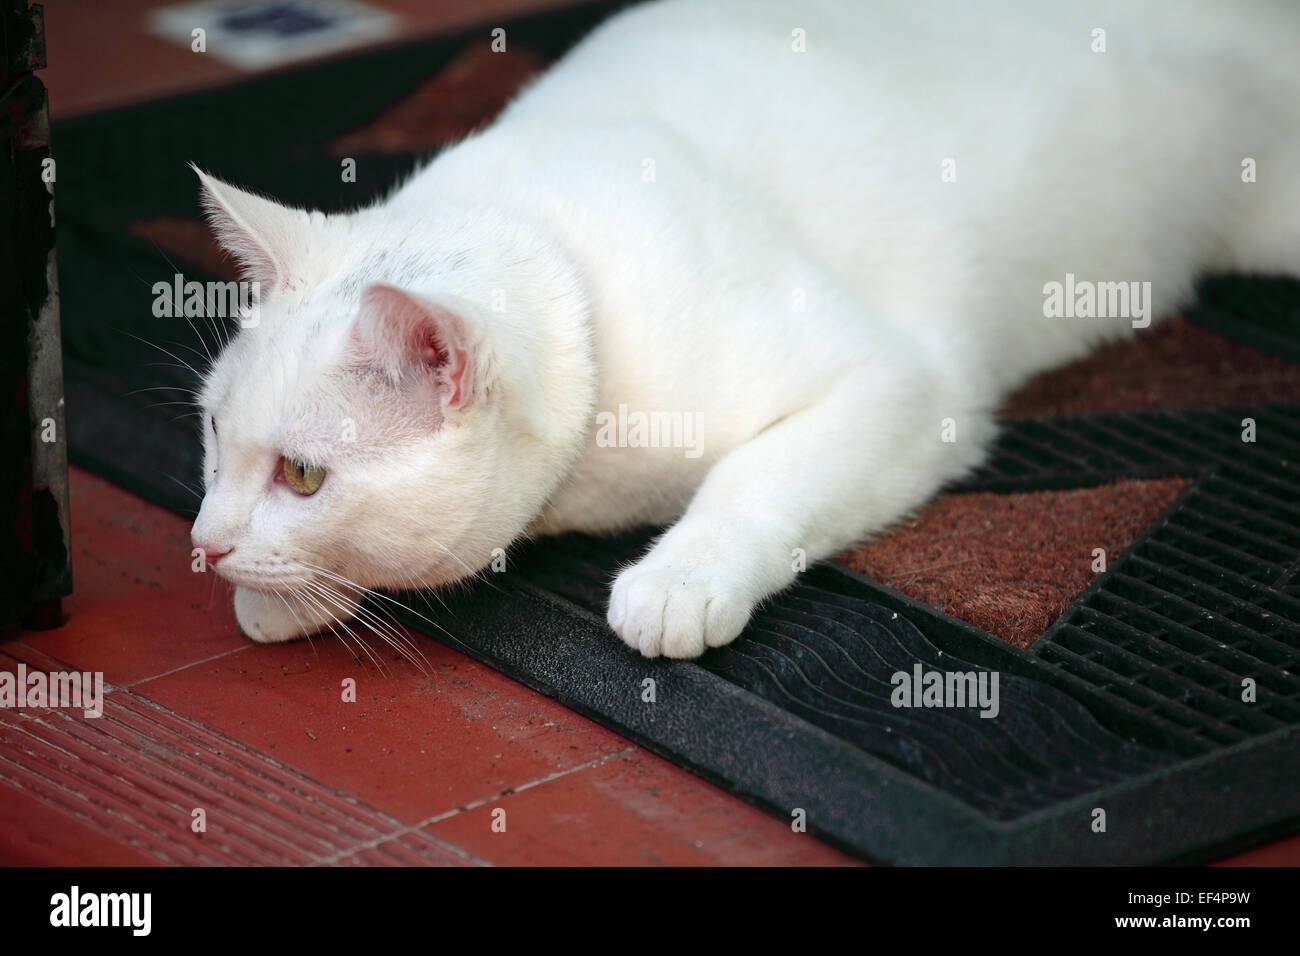 White cat with green eyes Stock Photo